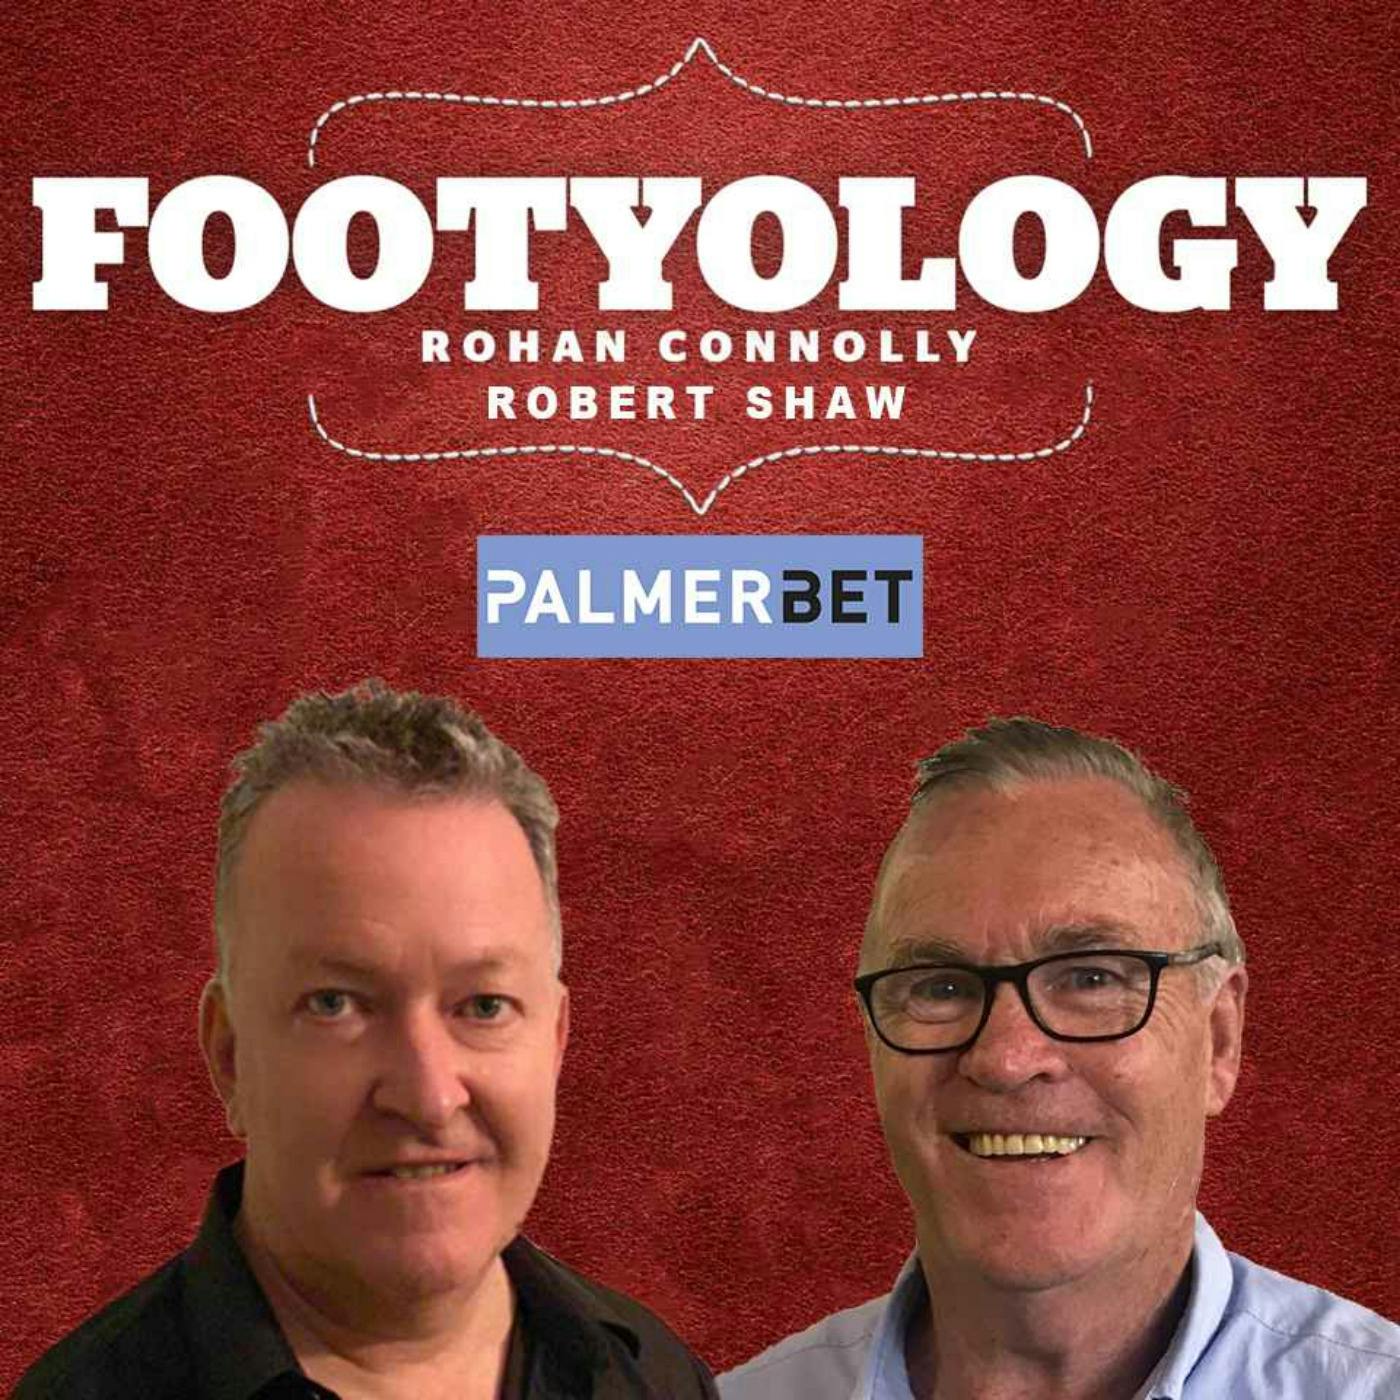 Footyology Podcast - July 27th 2022